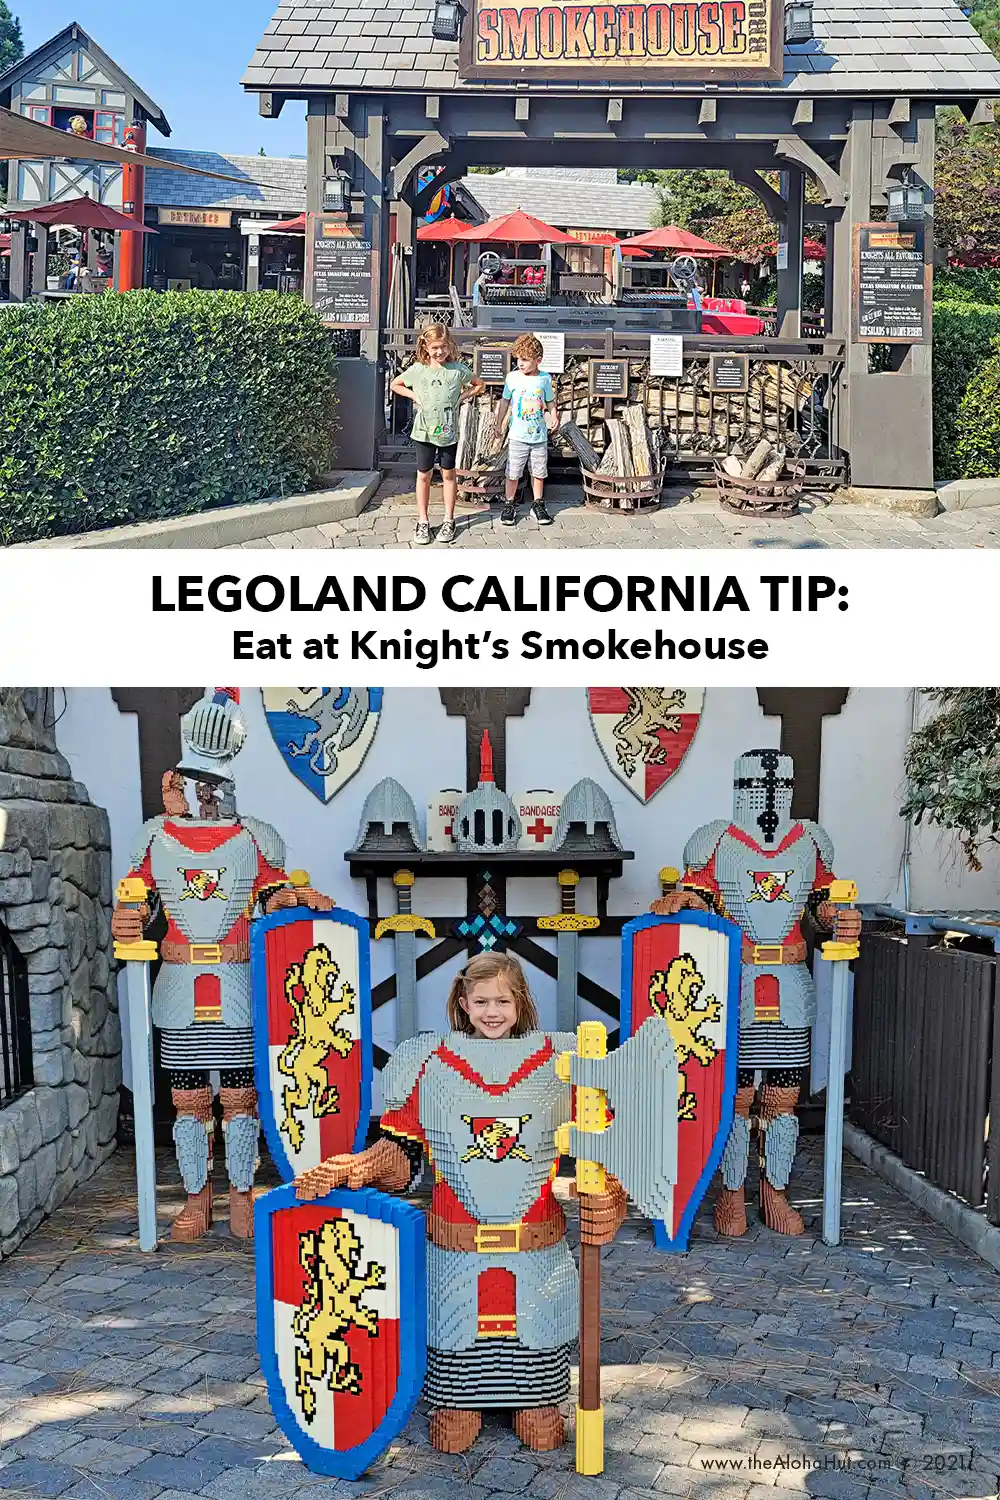 Legoland California - A Complete Guide for Families - tips & tricks - Knight's Smokehouse